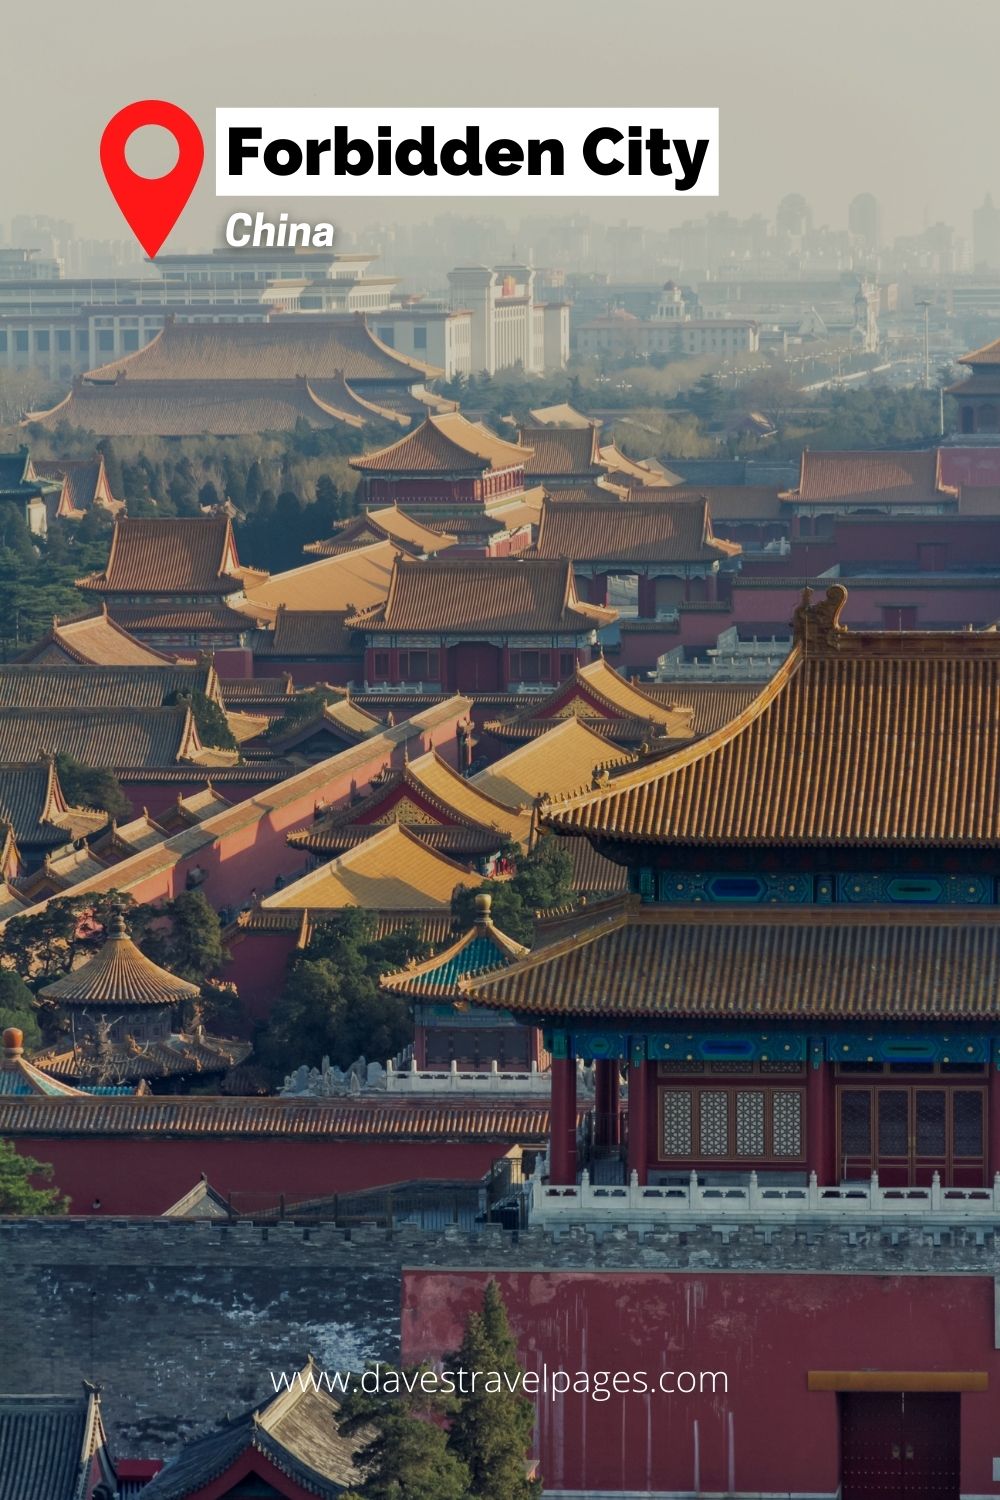 The Forbidden City in China - An Amazing Landmark